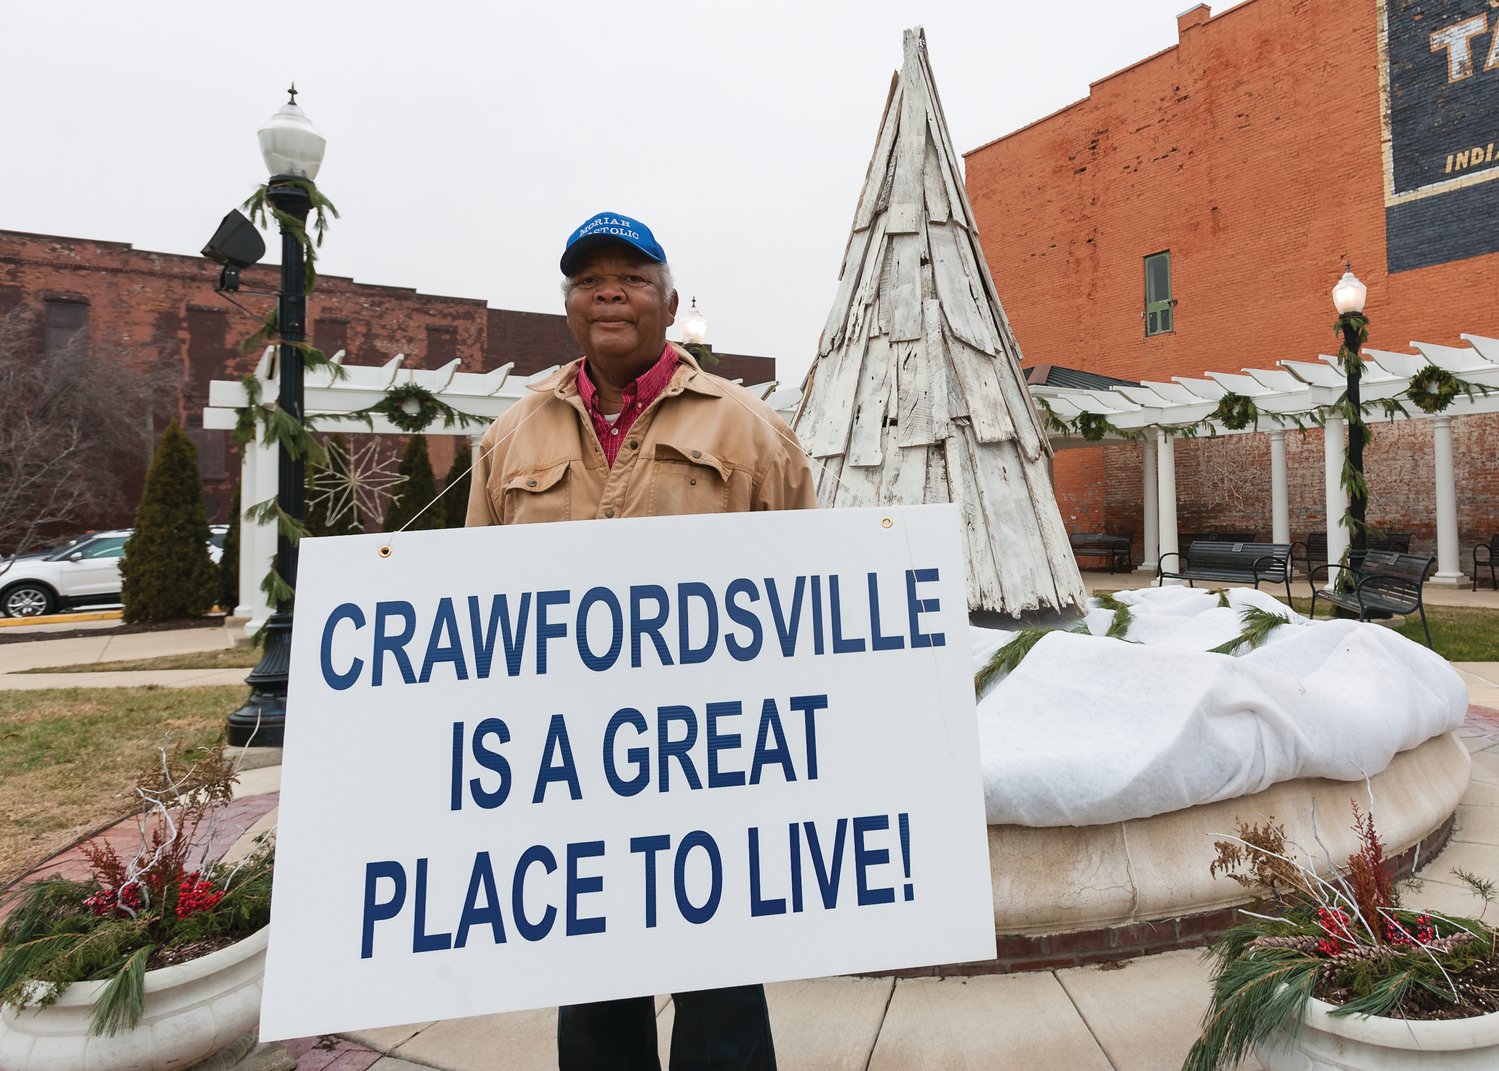 Bishop Clarence Lee had something to tell the community in December 2014: "Crawfordsville is a great place to live!"